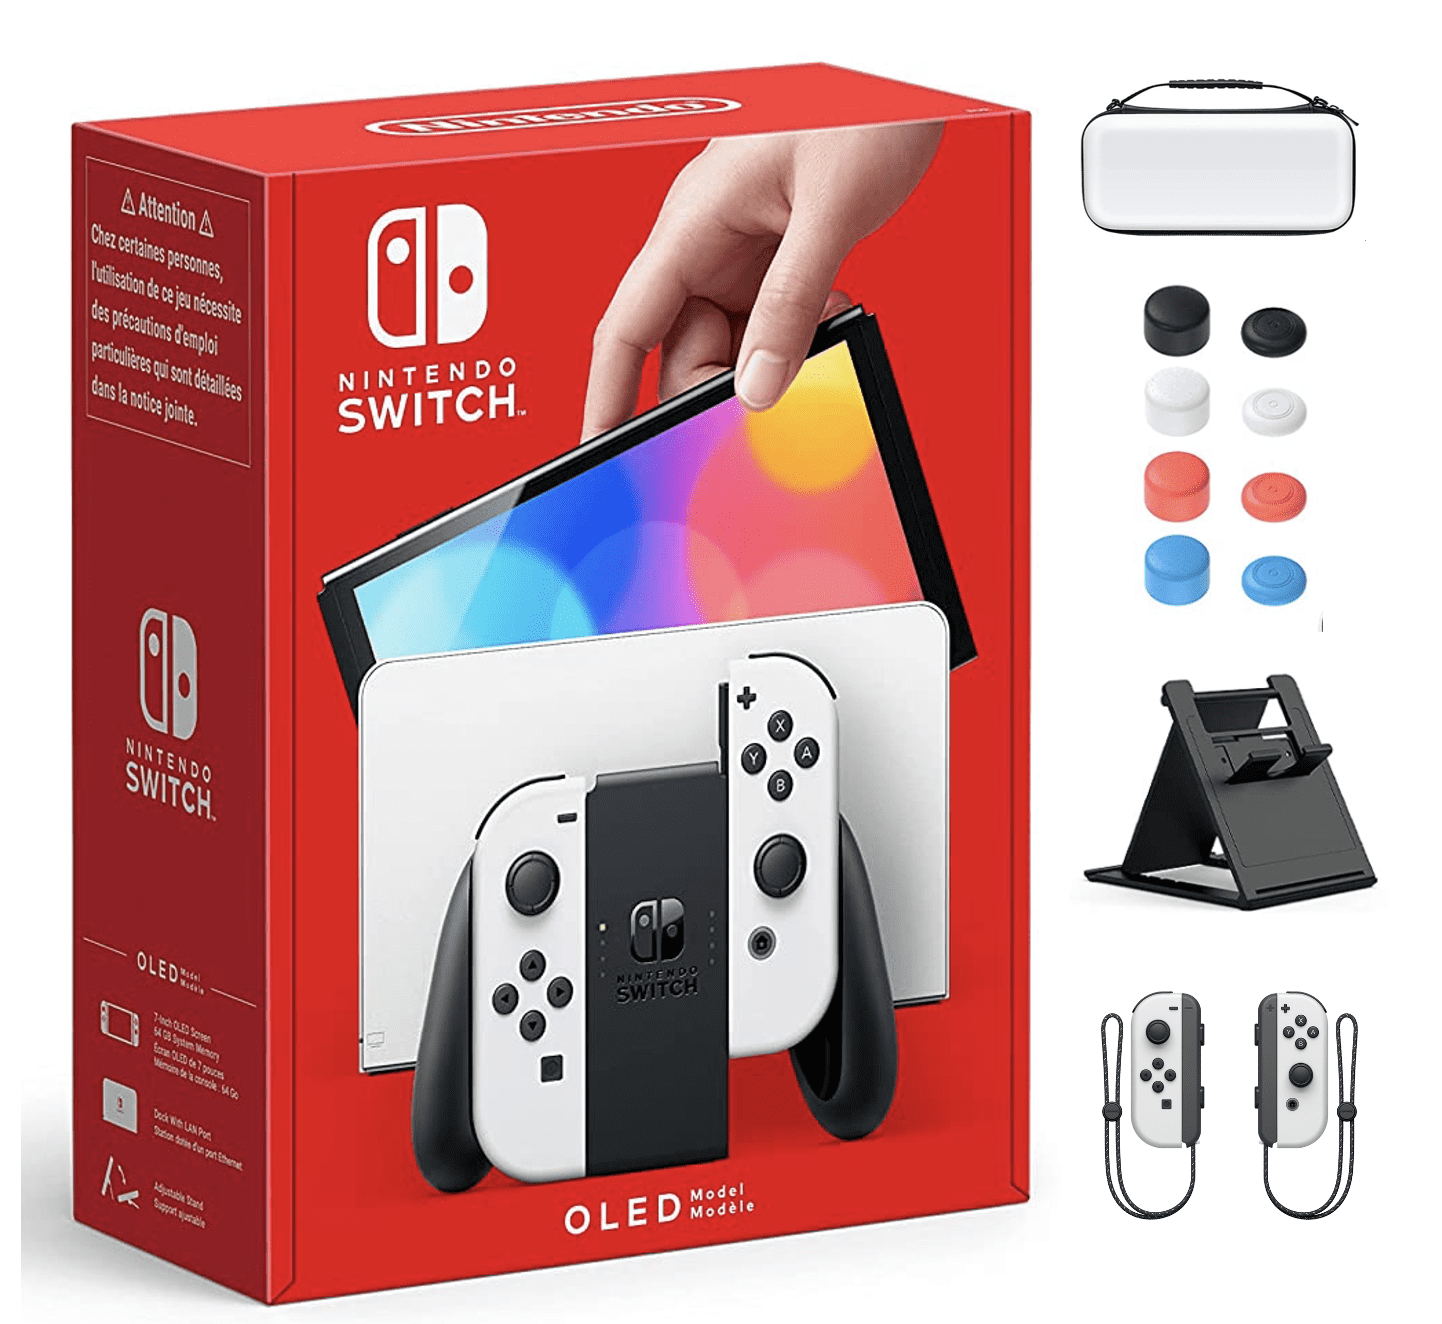 Switch OLED Console SVG & PNG High Resolution, Scalable, Transparent  Background Instant Digital Download 